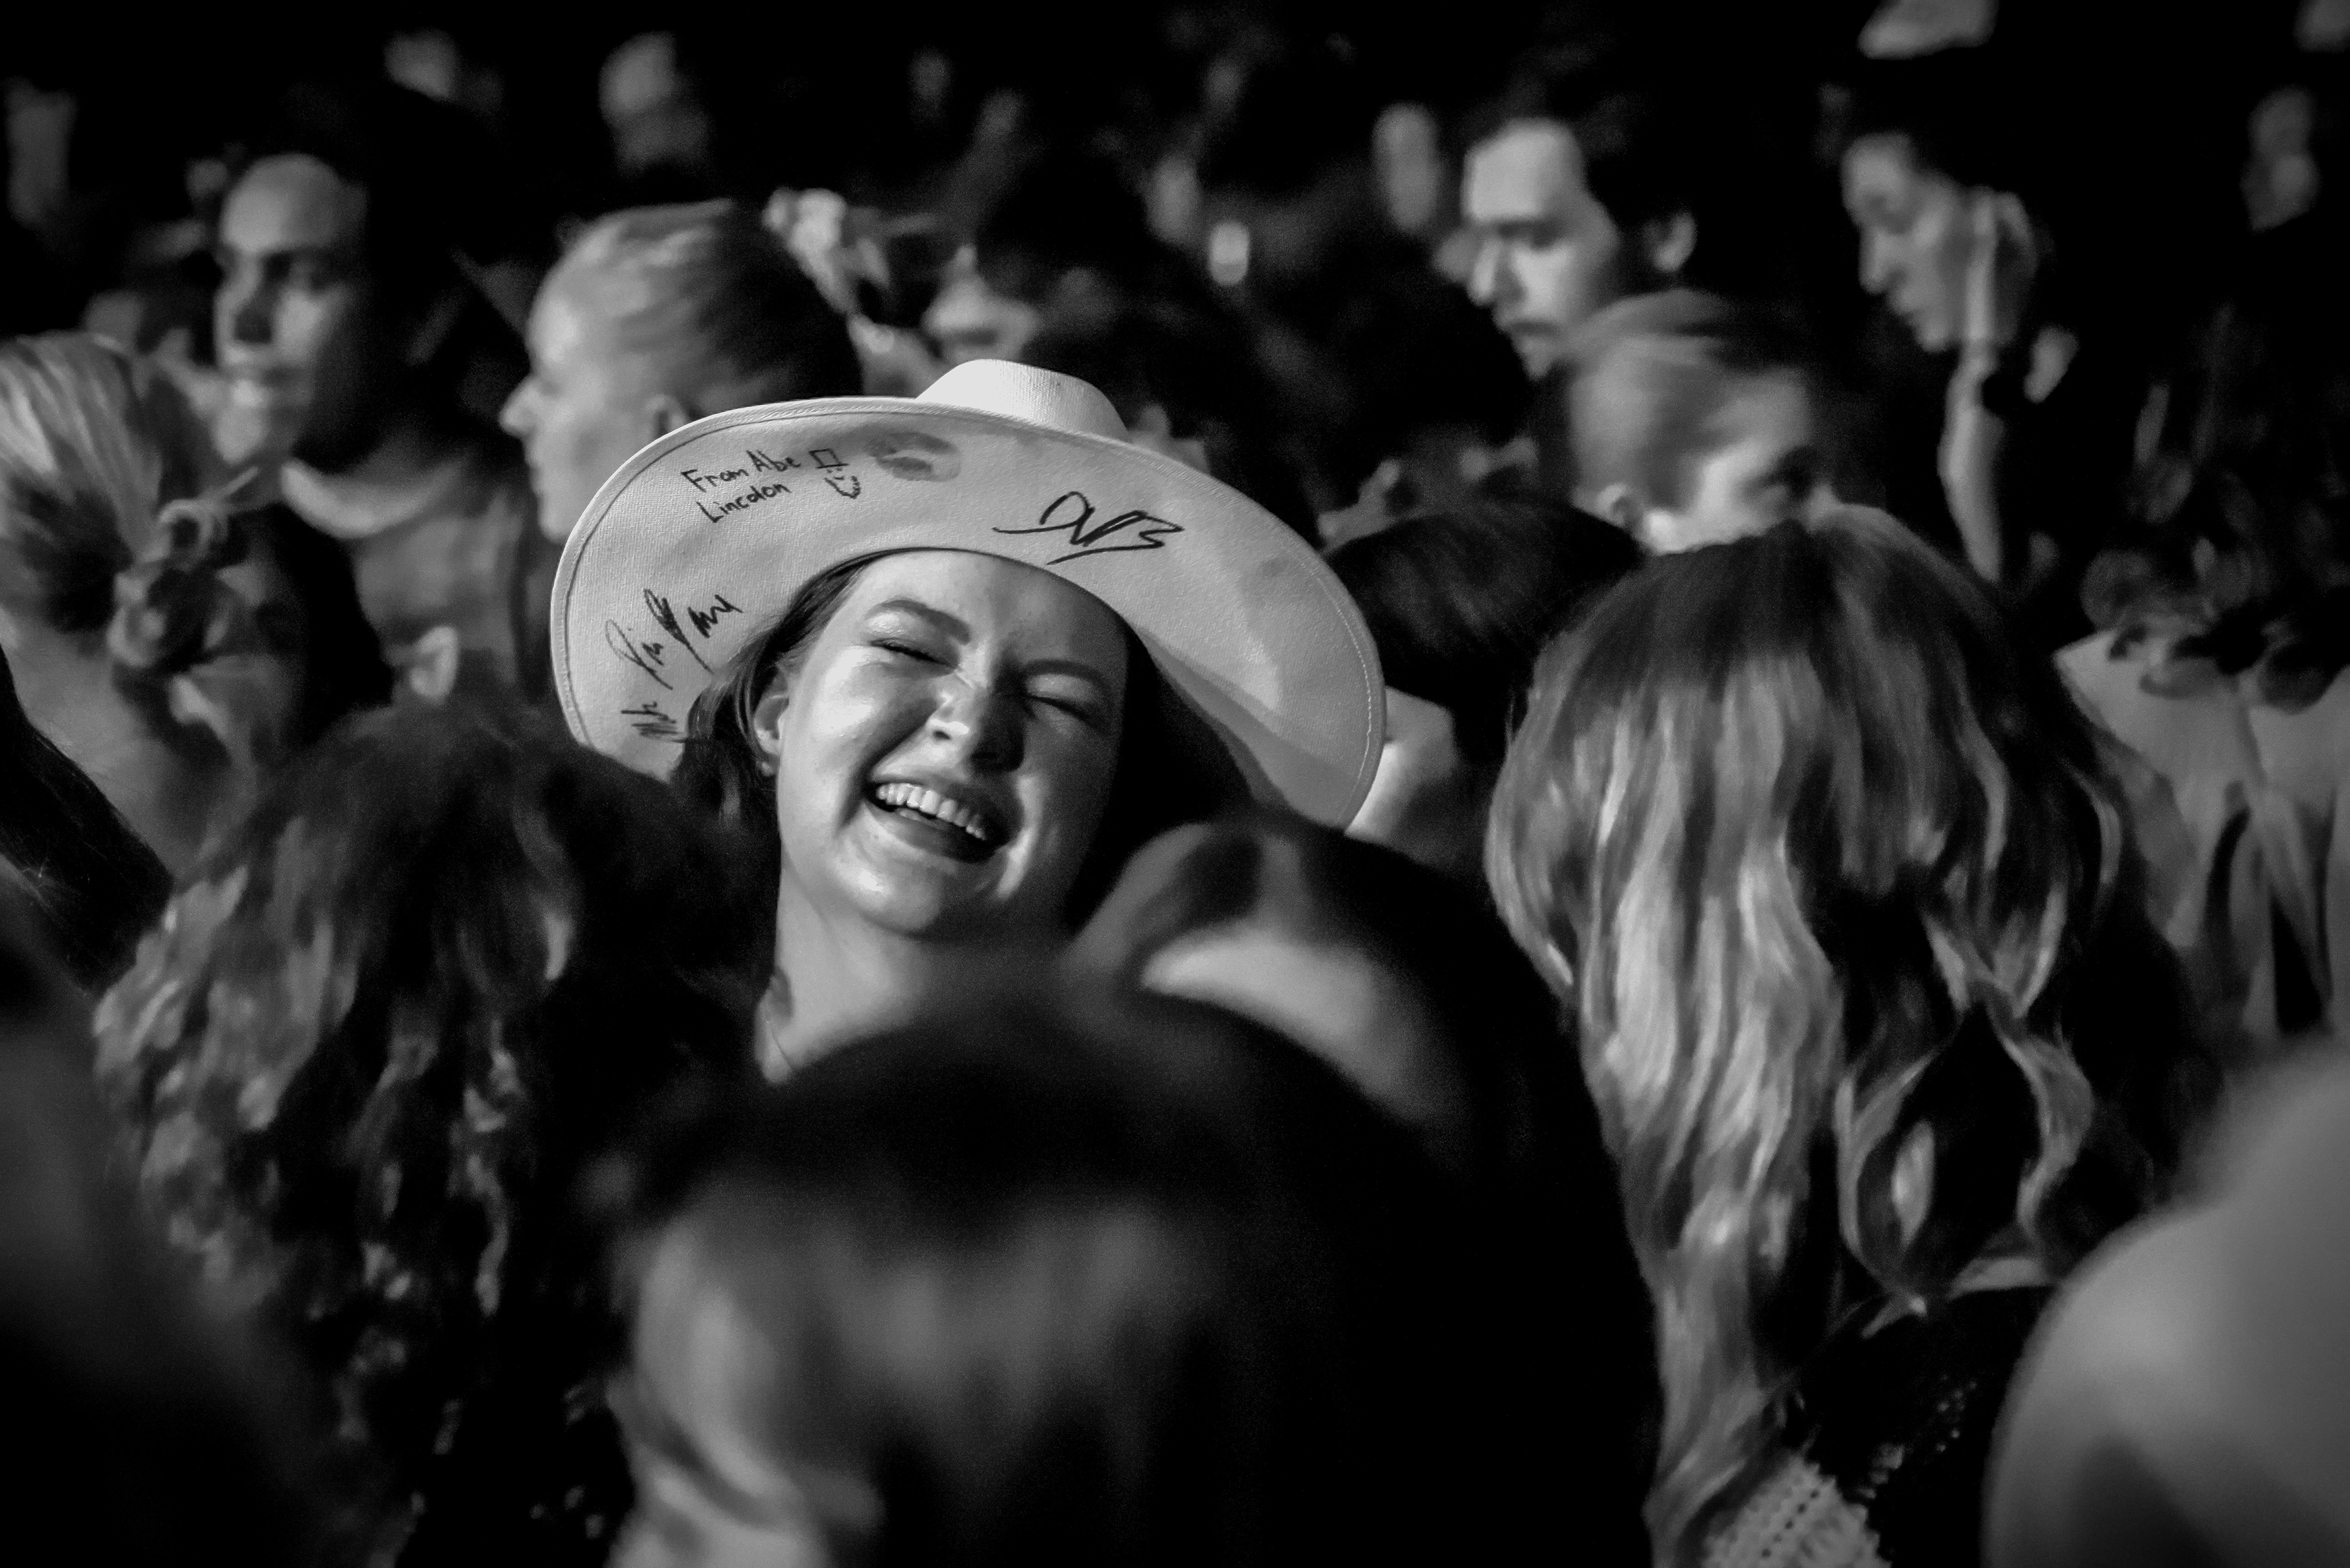 A person in the crowd smiling with a signed hat on 